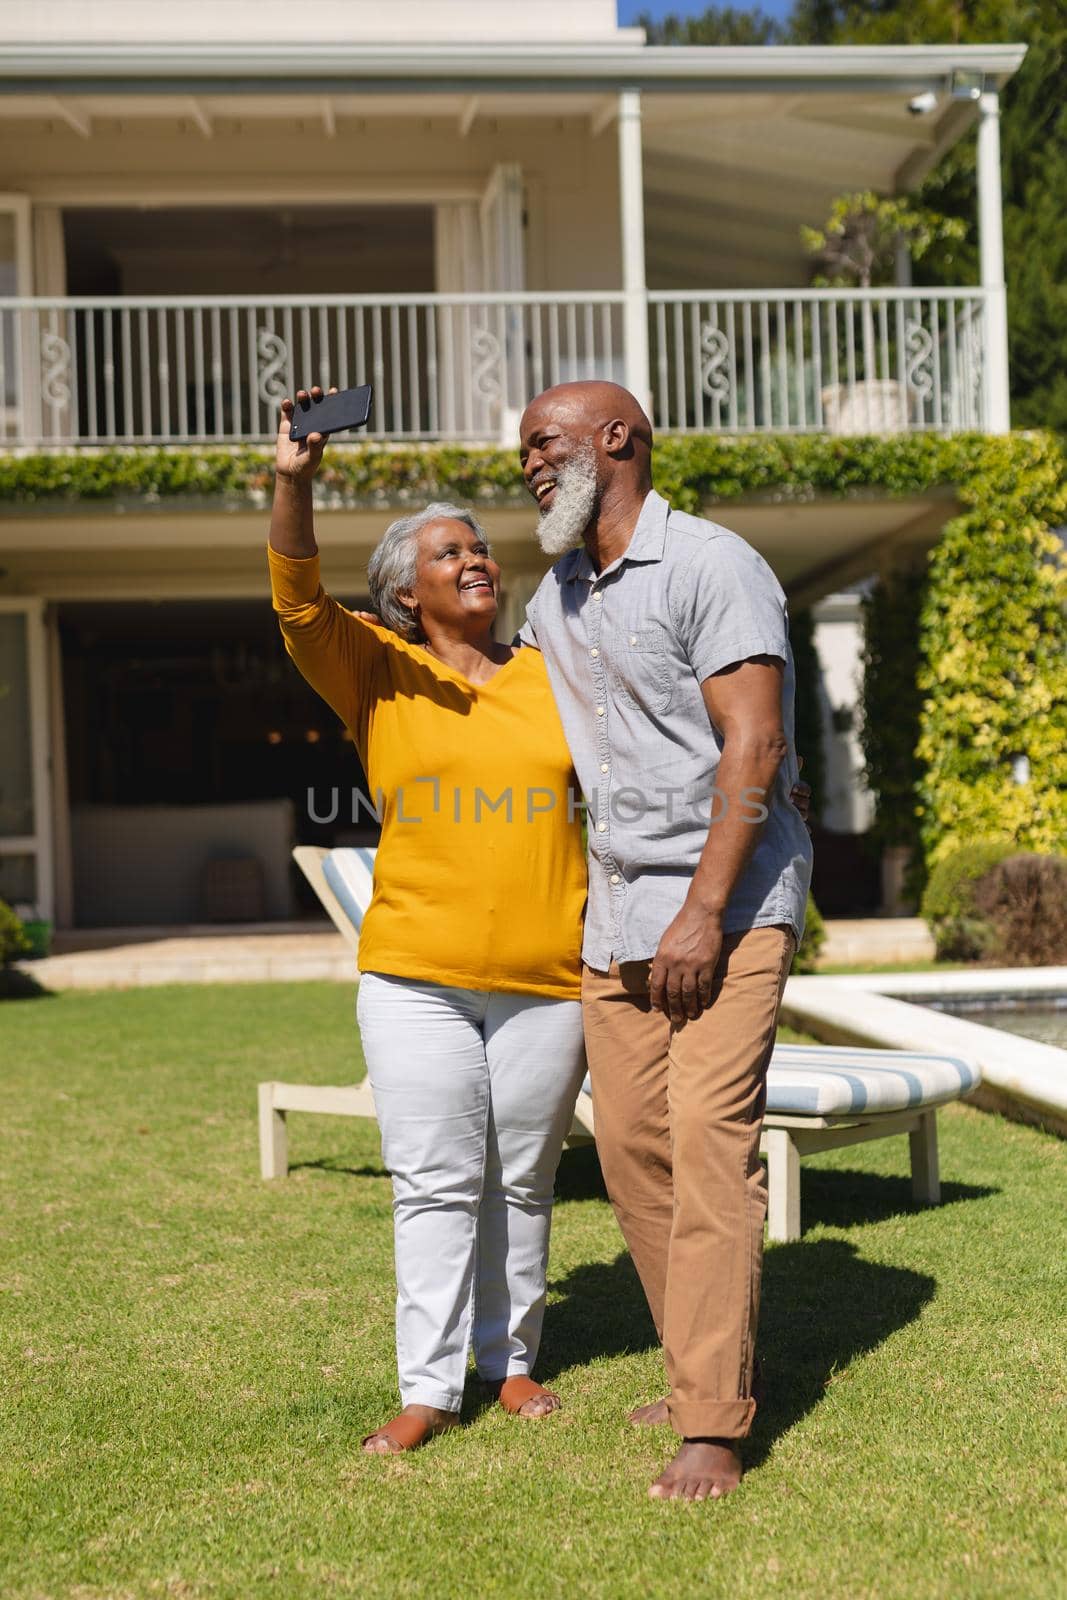 Senior african american couple spending time in sunny garden together taking selfies and smiling. retreat, retirement and happy senior lifestyle concept.